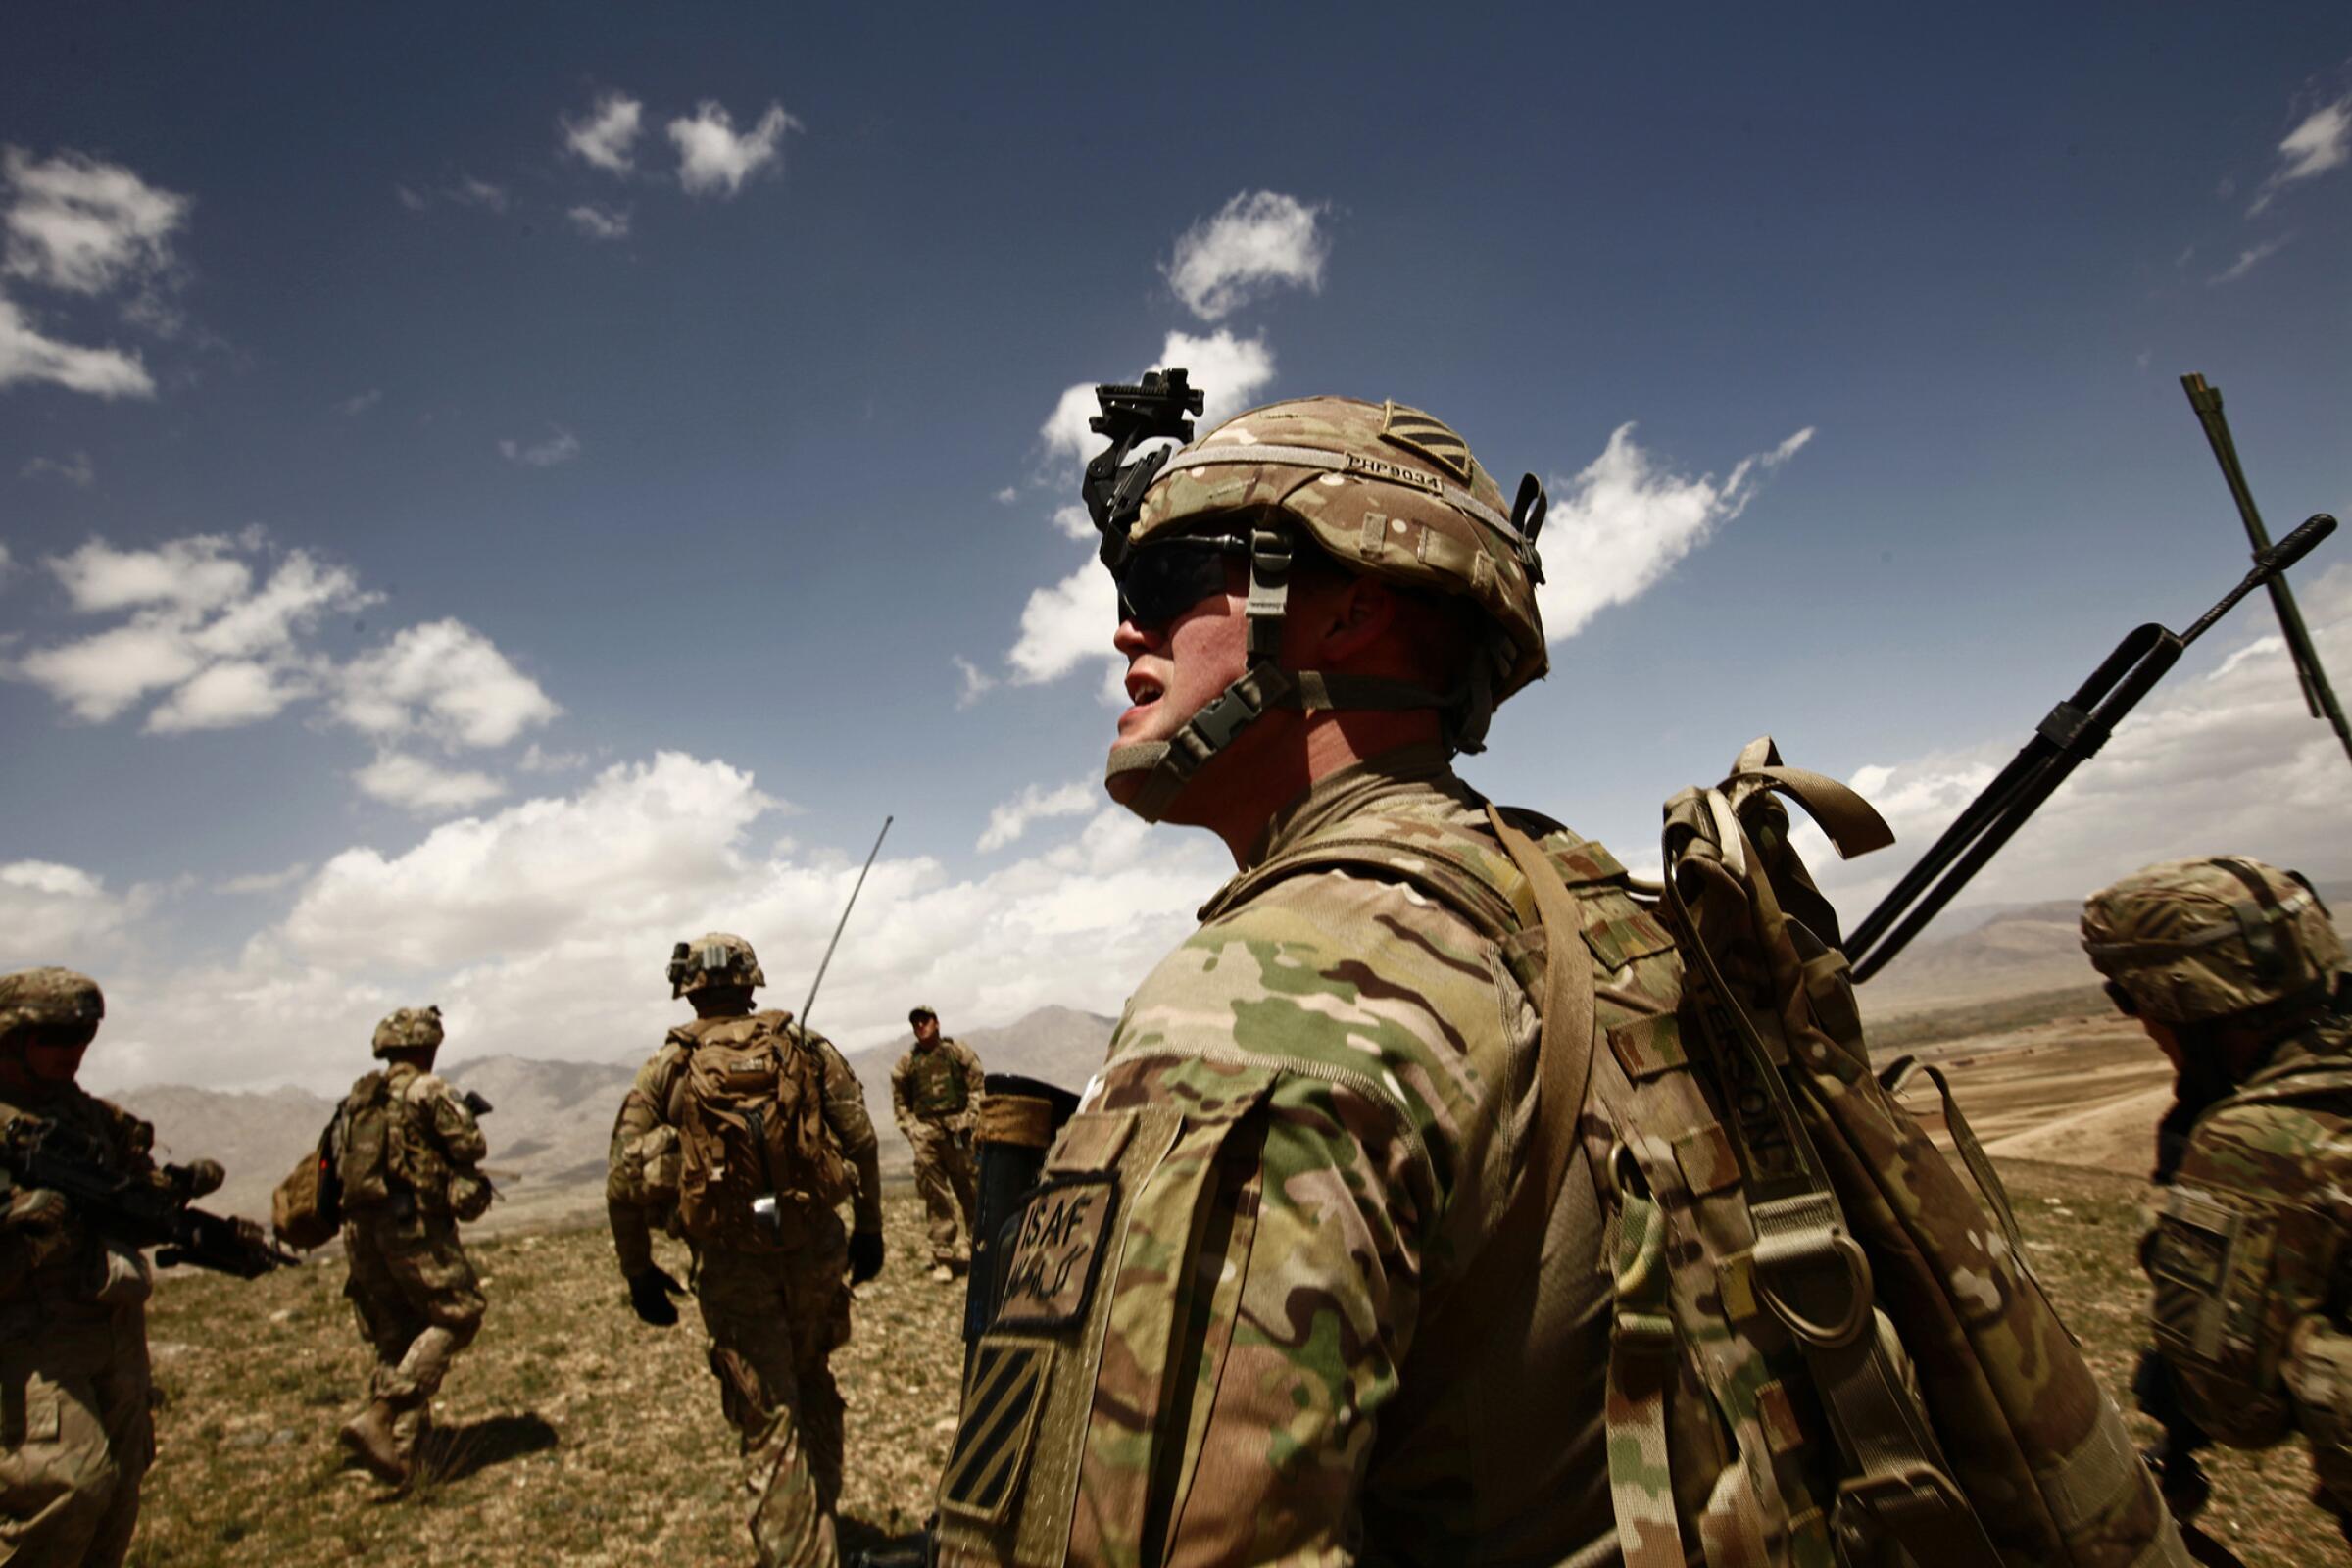 U.S. soldiers take part in an operation in support of Afghan soldiers in Wardak province, Afghanistan, in 2013.